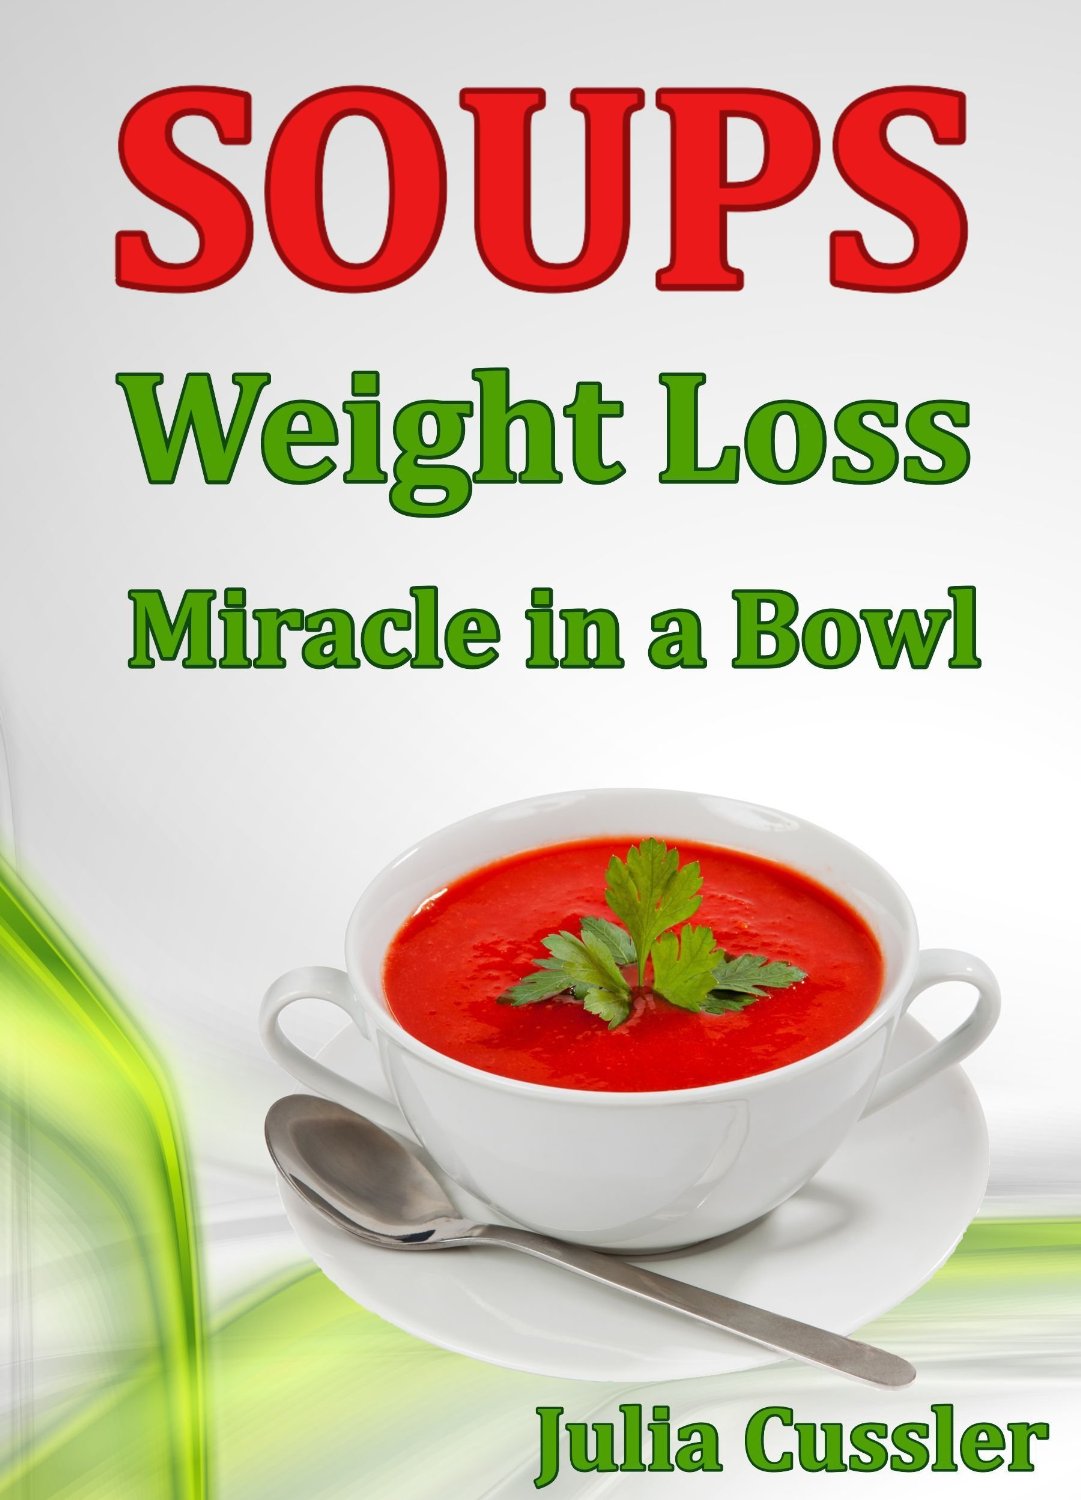 Soups! Weight Loss Miracle in a Bowl by Julia Cussler